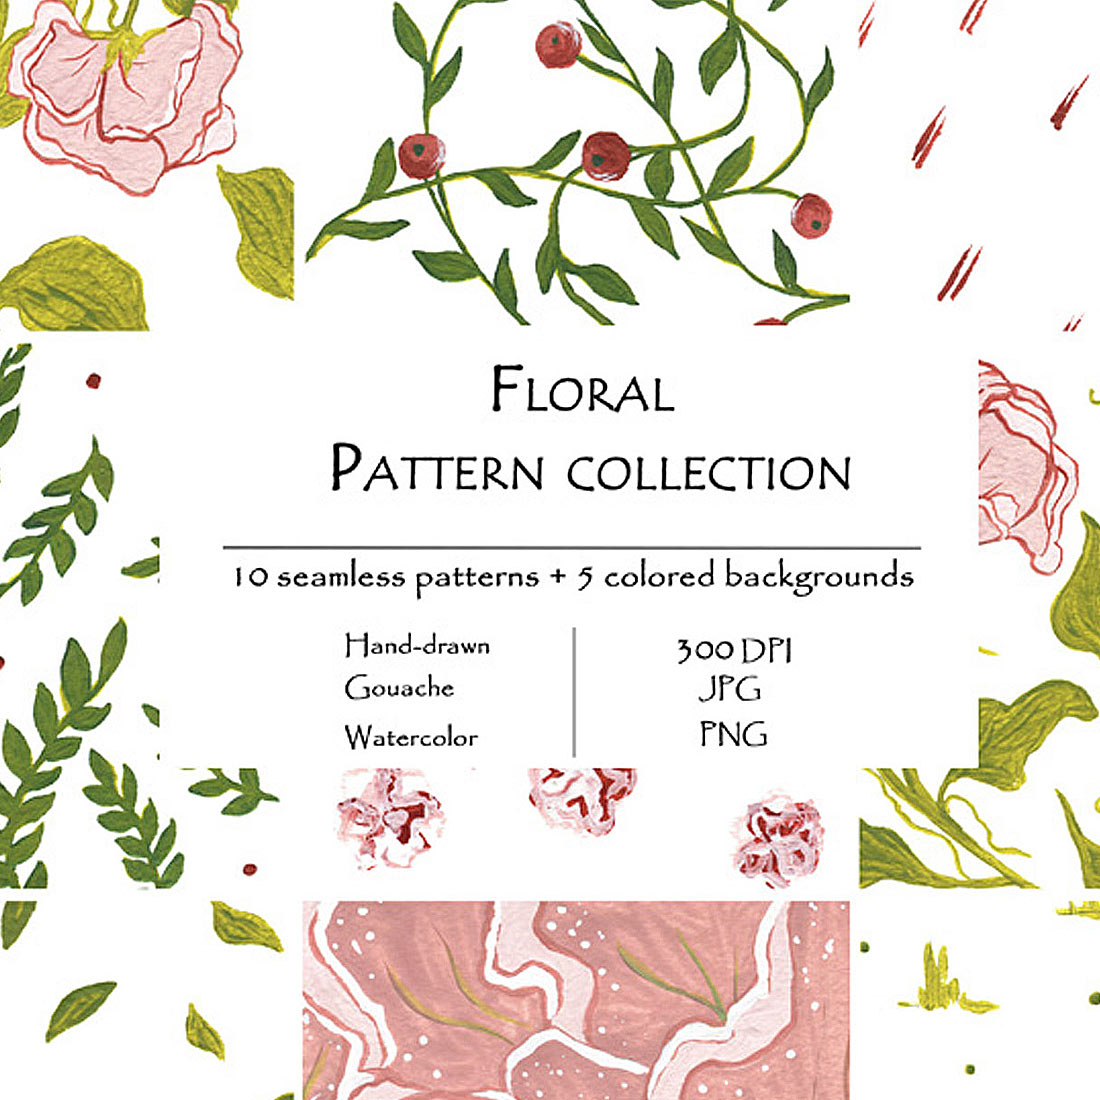 Floral Pattern Collection Of 10 Seamless Patterns And 5 Colored Backgrounds Cover Image.